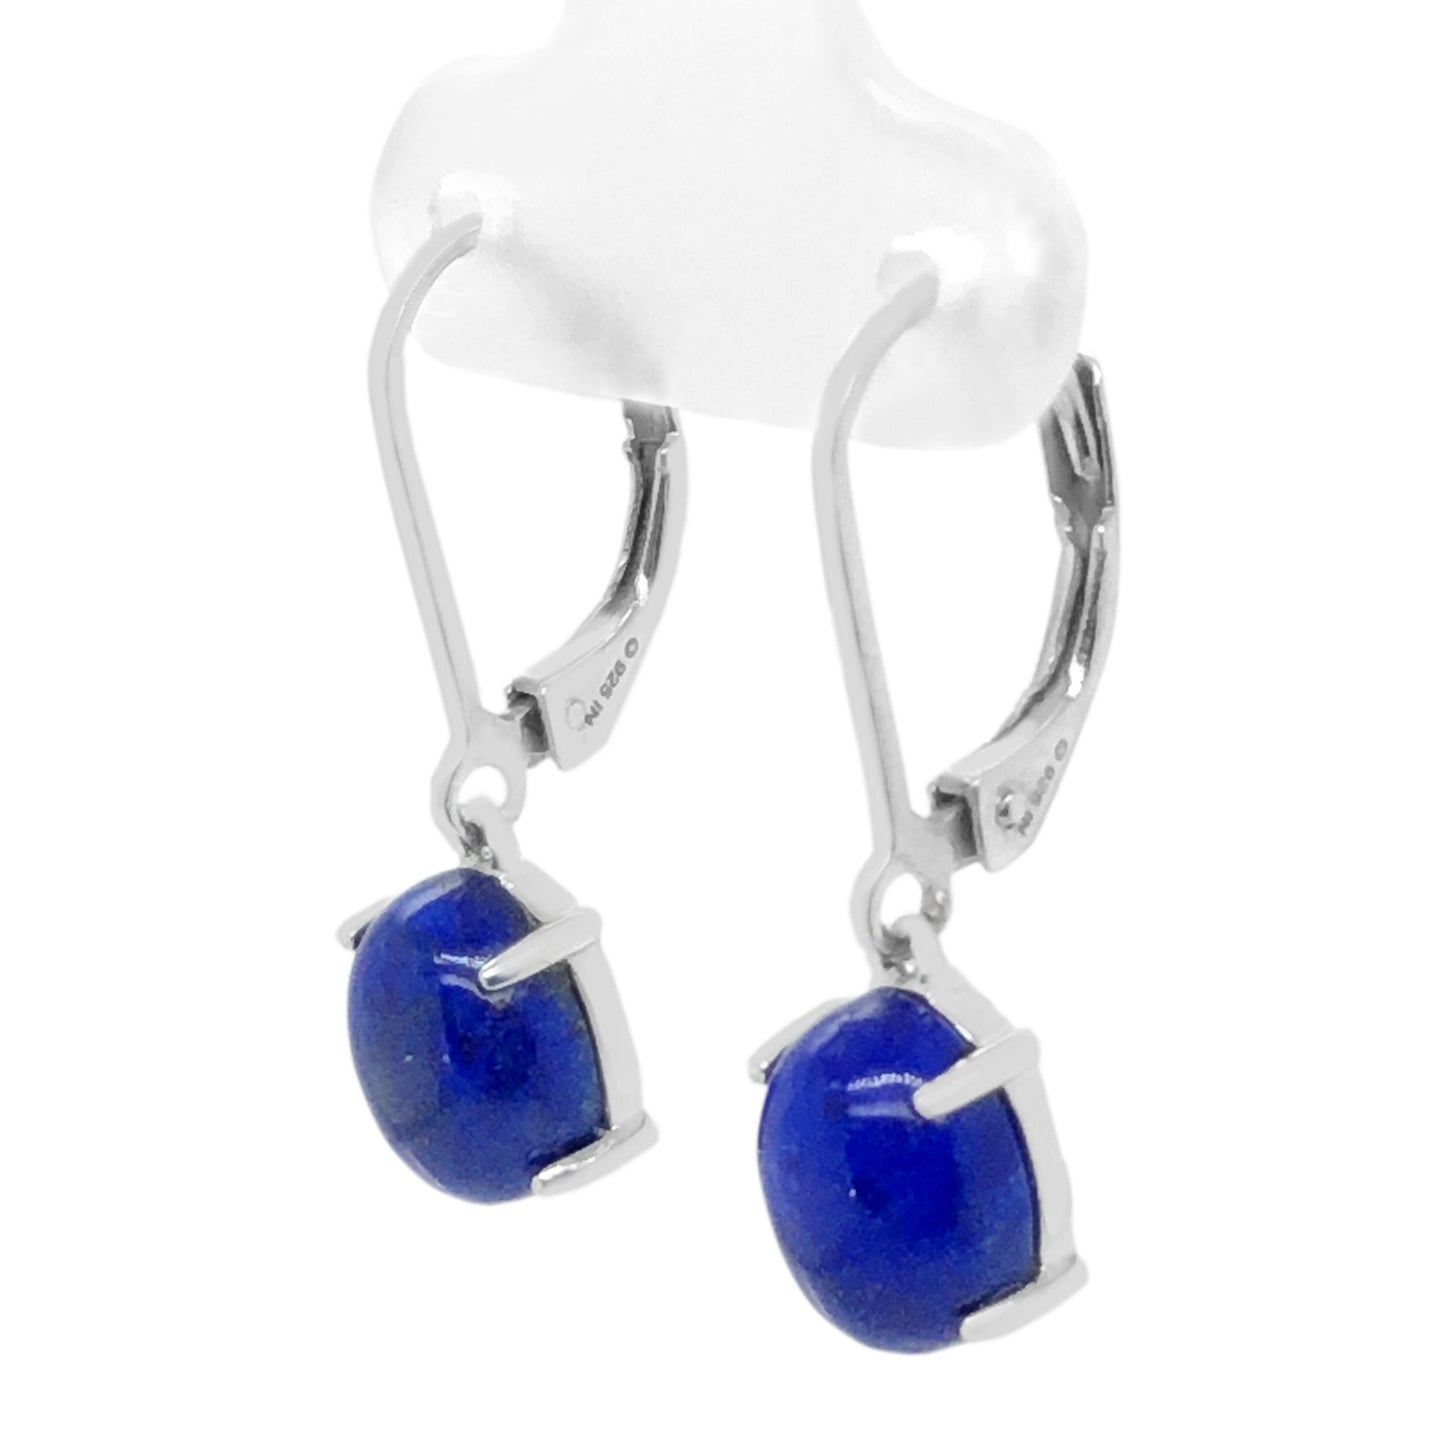 Natural Lapis Lazuli Gemstone Earrings, 925 Sterling Silver Dangle And Drop Earrings, Everyday Jewelry, Gift